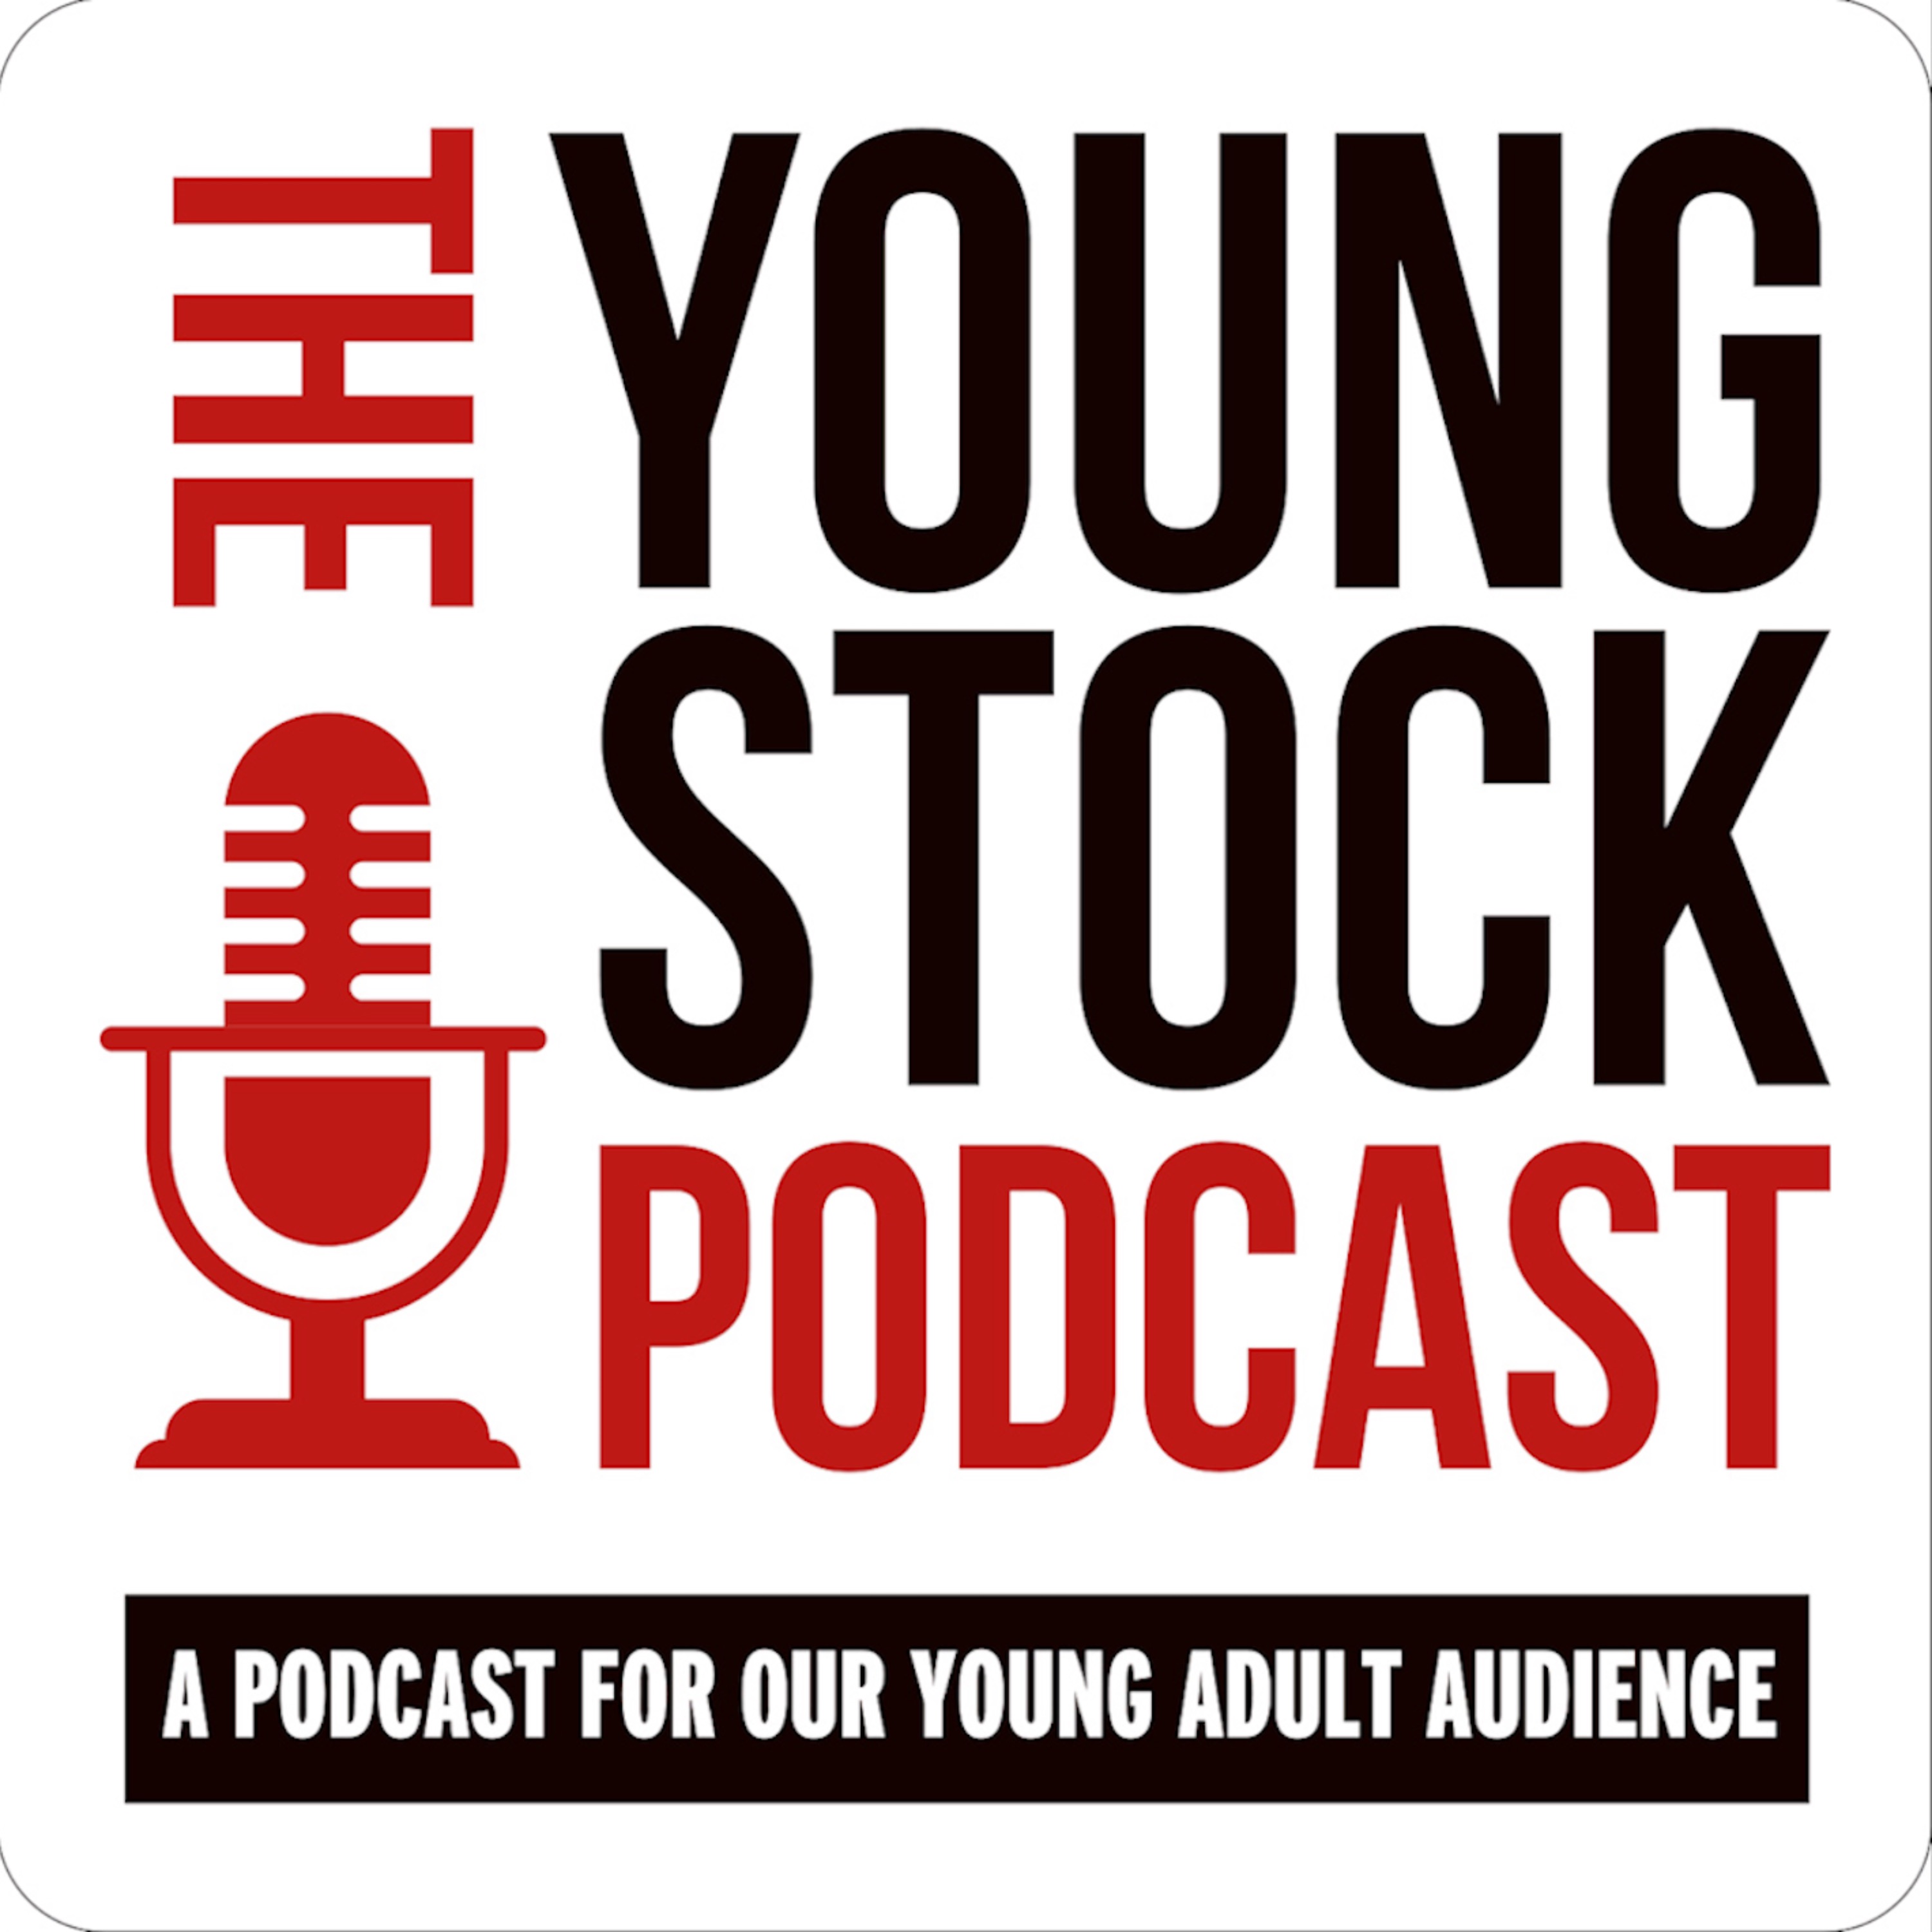 Ep 995: Young Stock Podcast -  Episode 92 - Behind the scenes judging Mr Personality